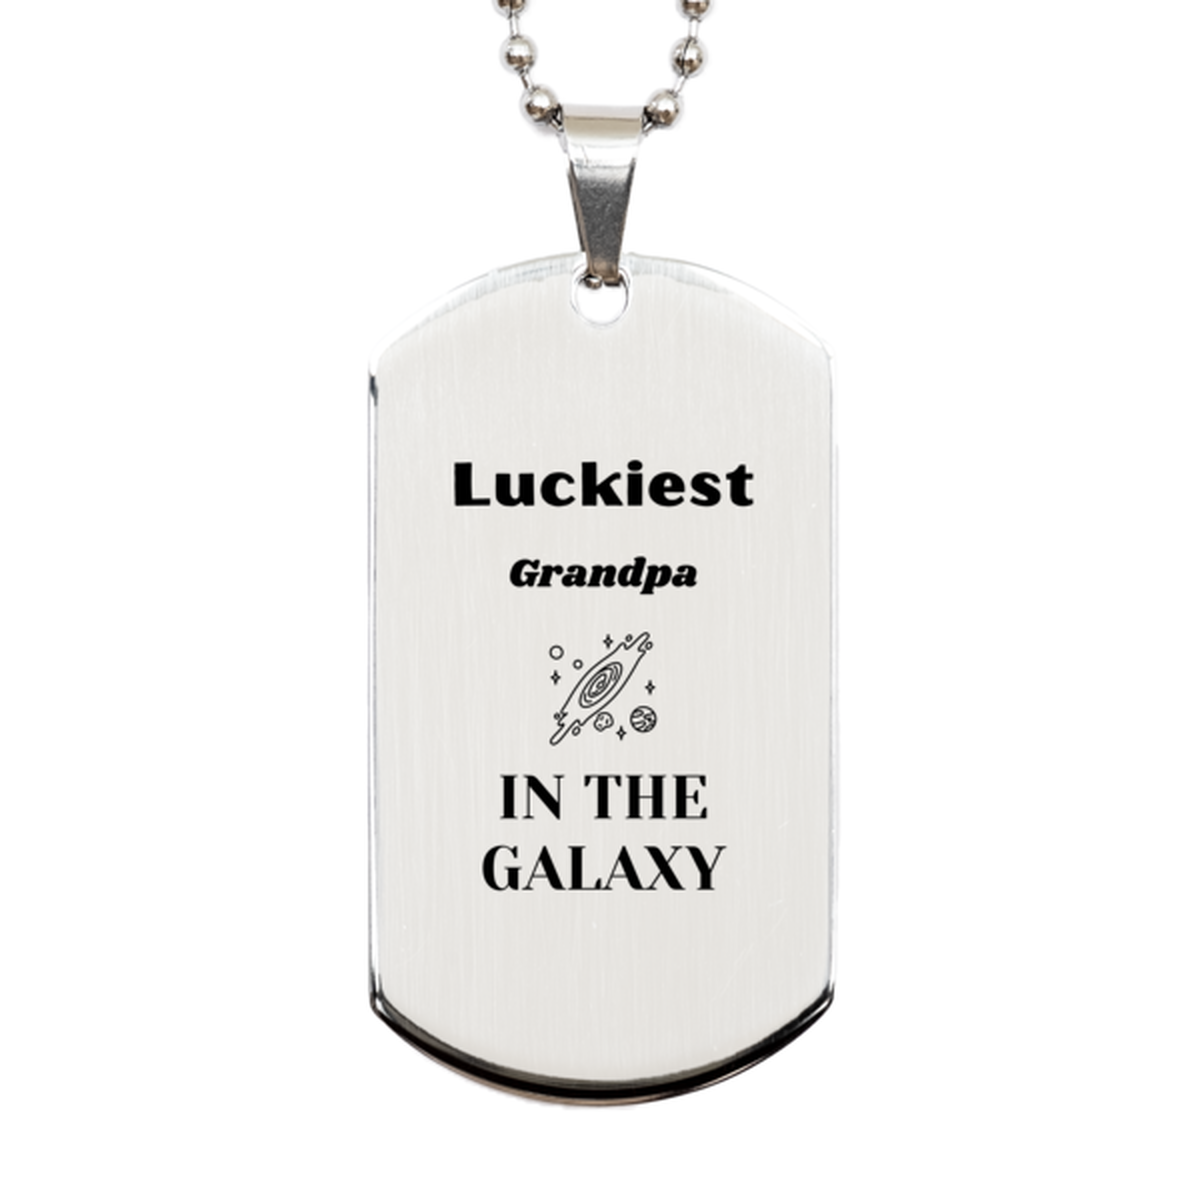 Luckiest Grandpa in the Galaxy, To My Grandpa Engraved Gifts, Christmas Grandpa Silver Dog Tag Gifts, X-mas Birthday Unique Gifts For Grandpa Men Women